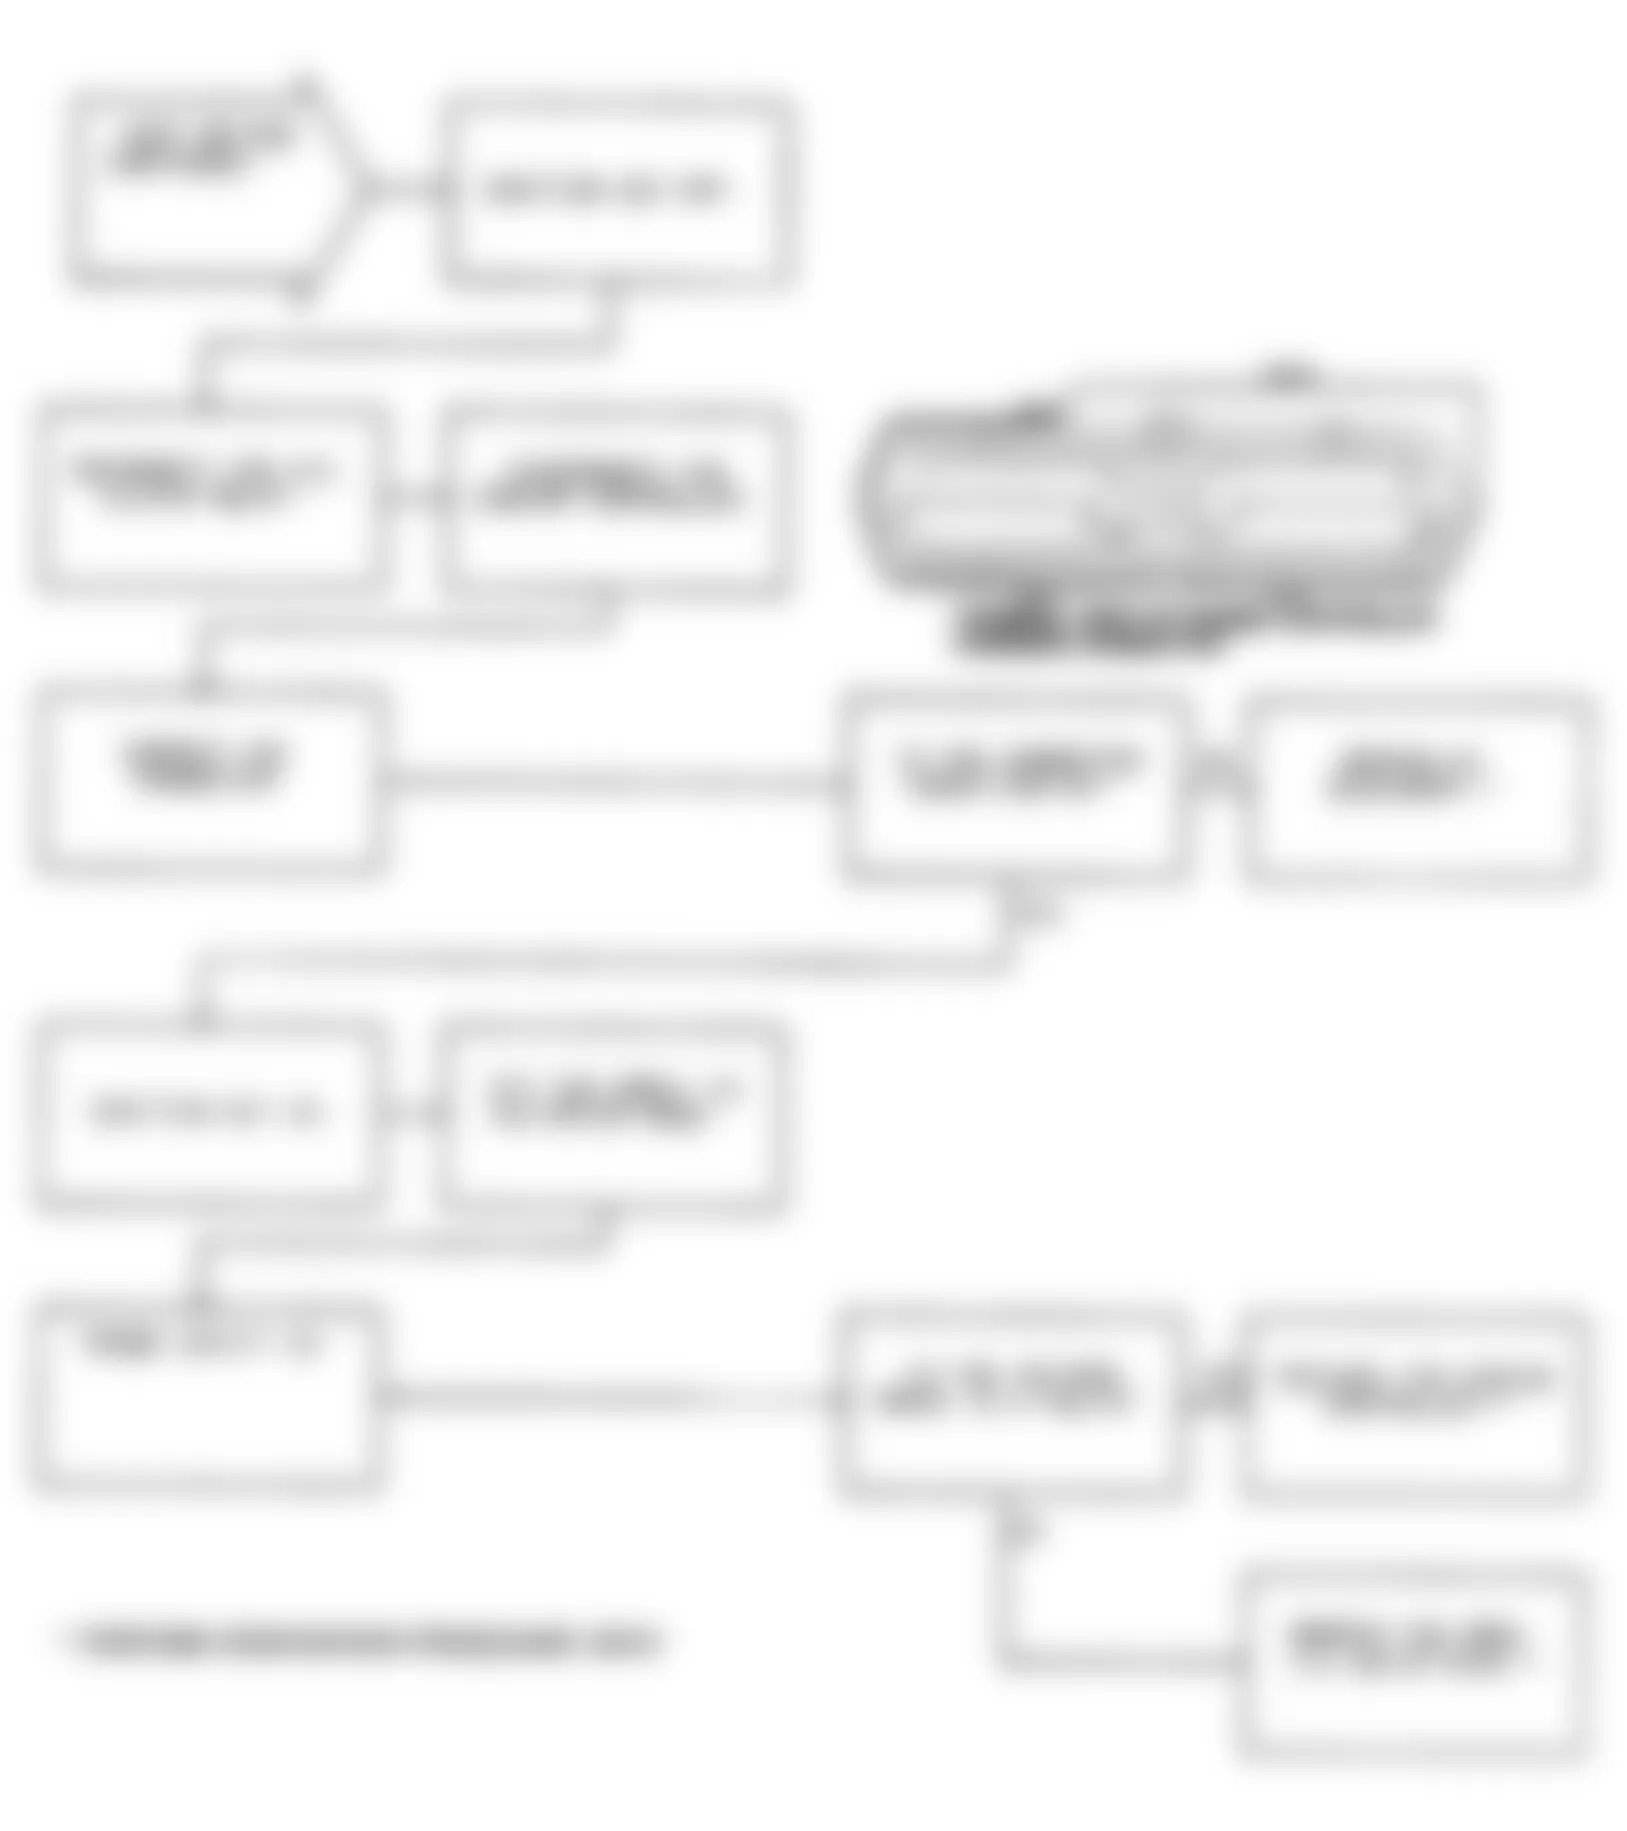 Chrysler Imperial 1991 - Component Locations -  Test DR-25A Code 33: Flowchart (2 of 2)